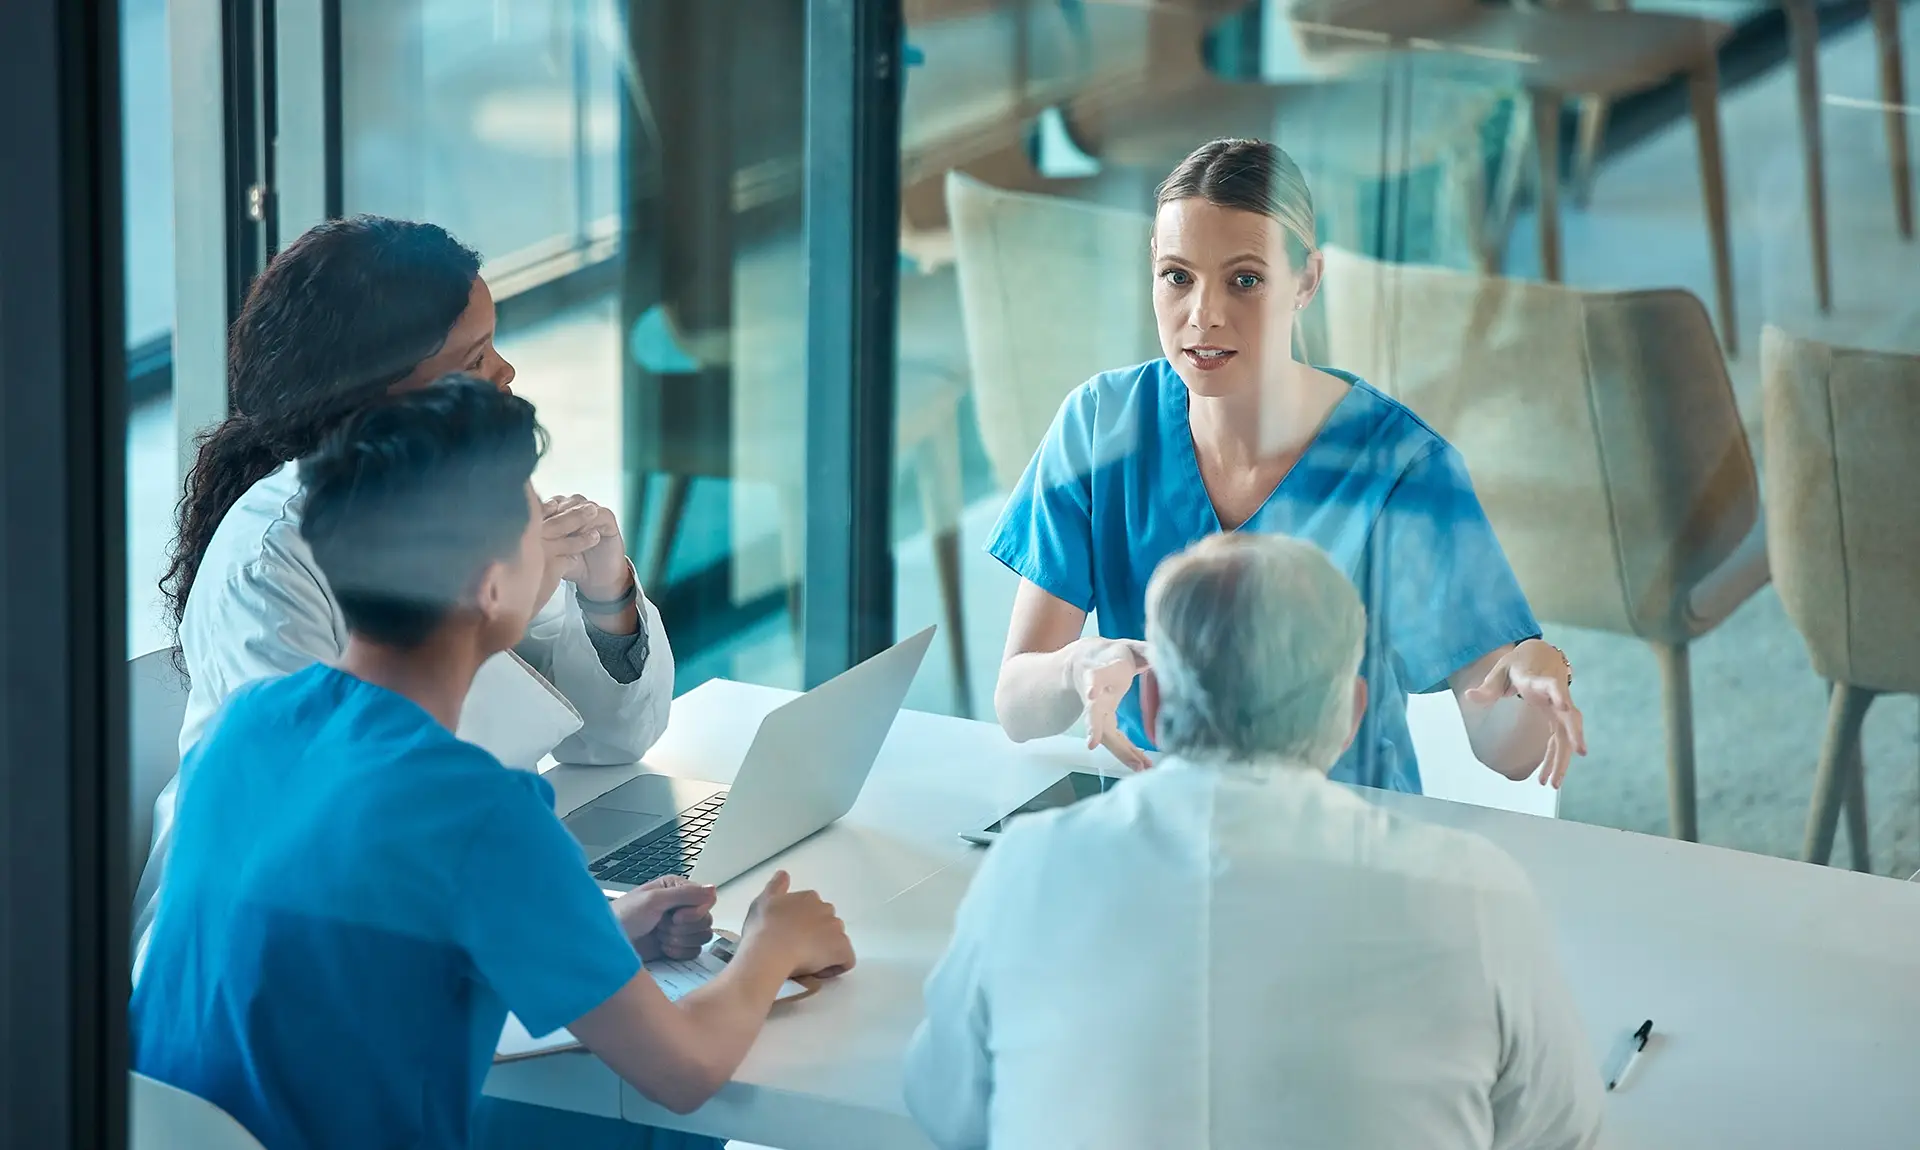 Four healthcare professionals having a discussion at a table in a modern office setting.